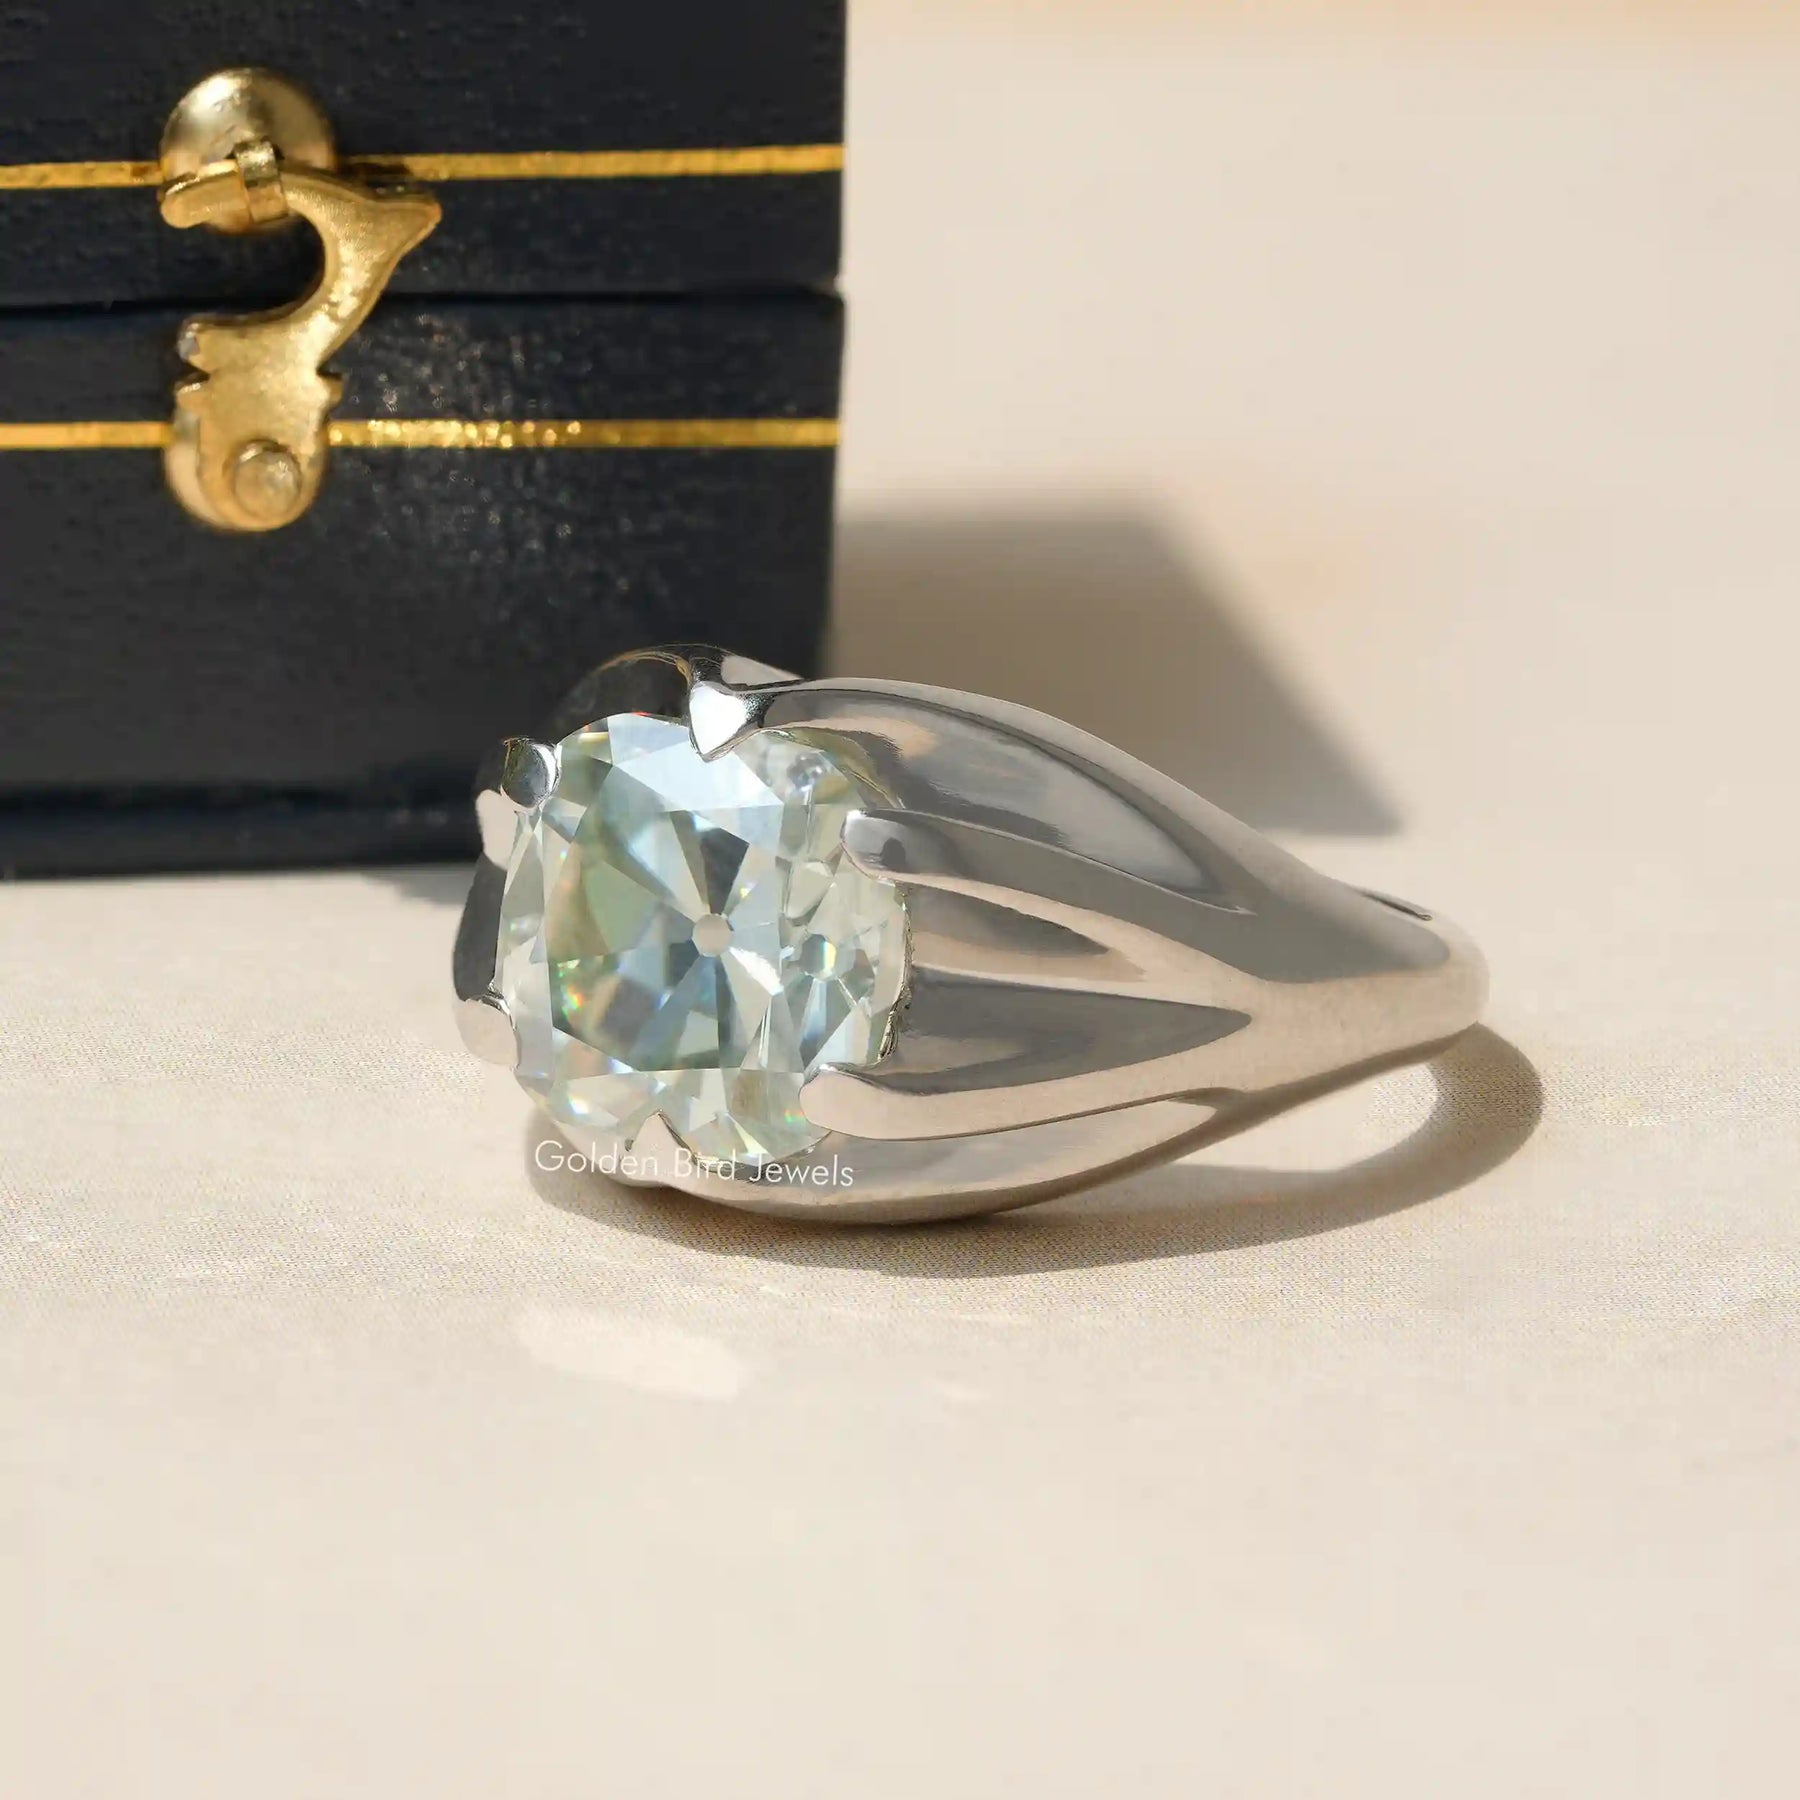 [Moissanite Solitaire Engagement Ring Made Of Old Mine Cushion Cut Stone]-[Golden Bird Jewels]